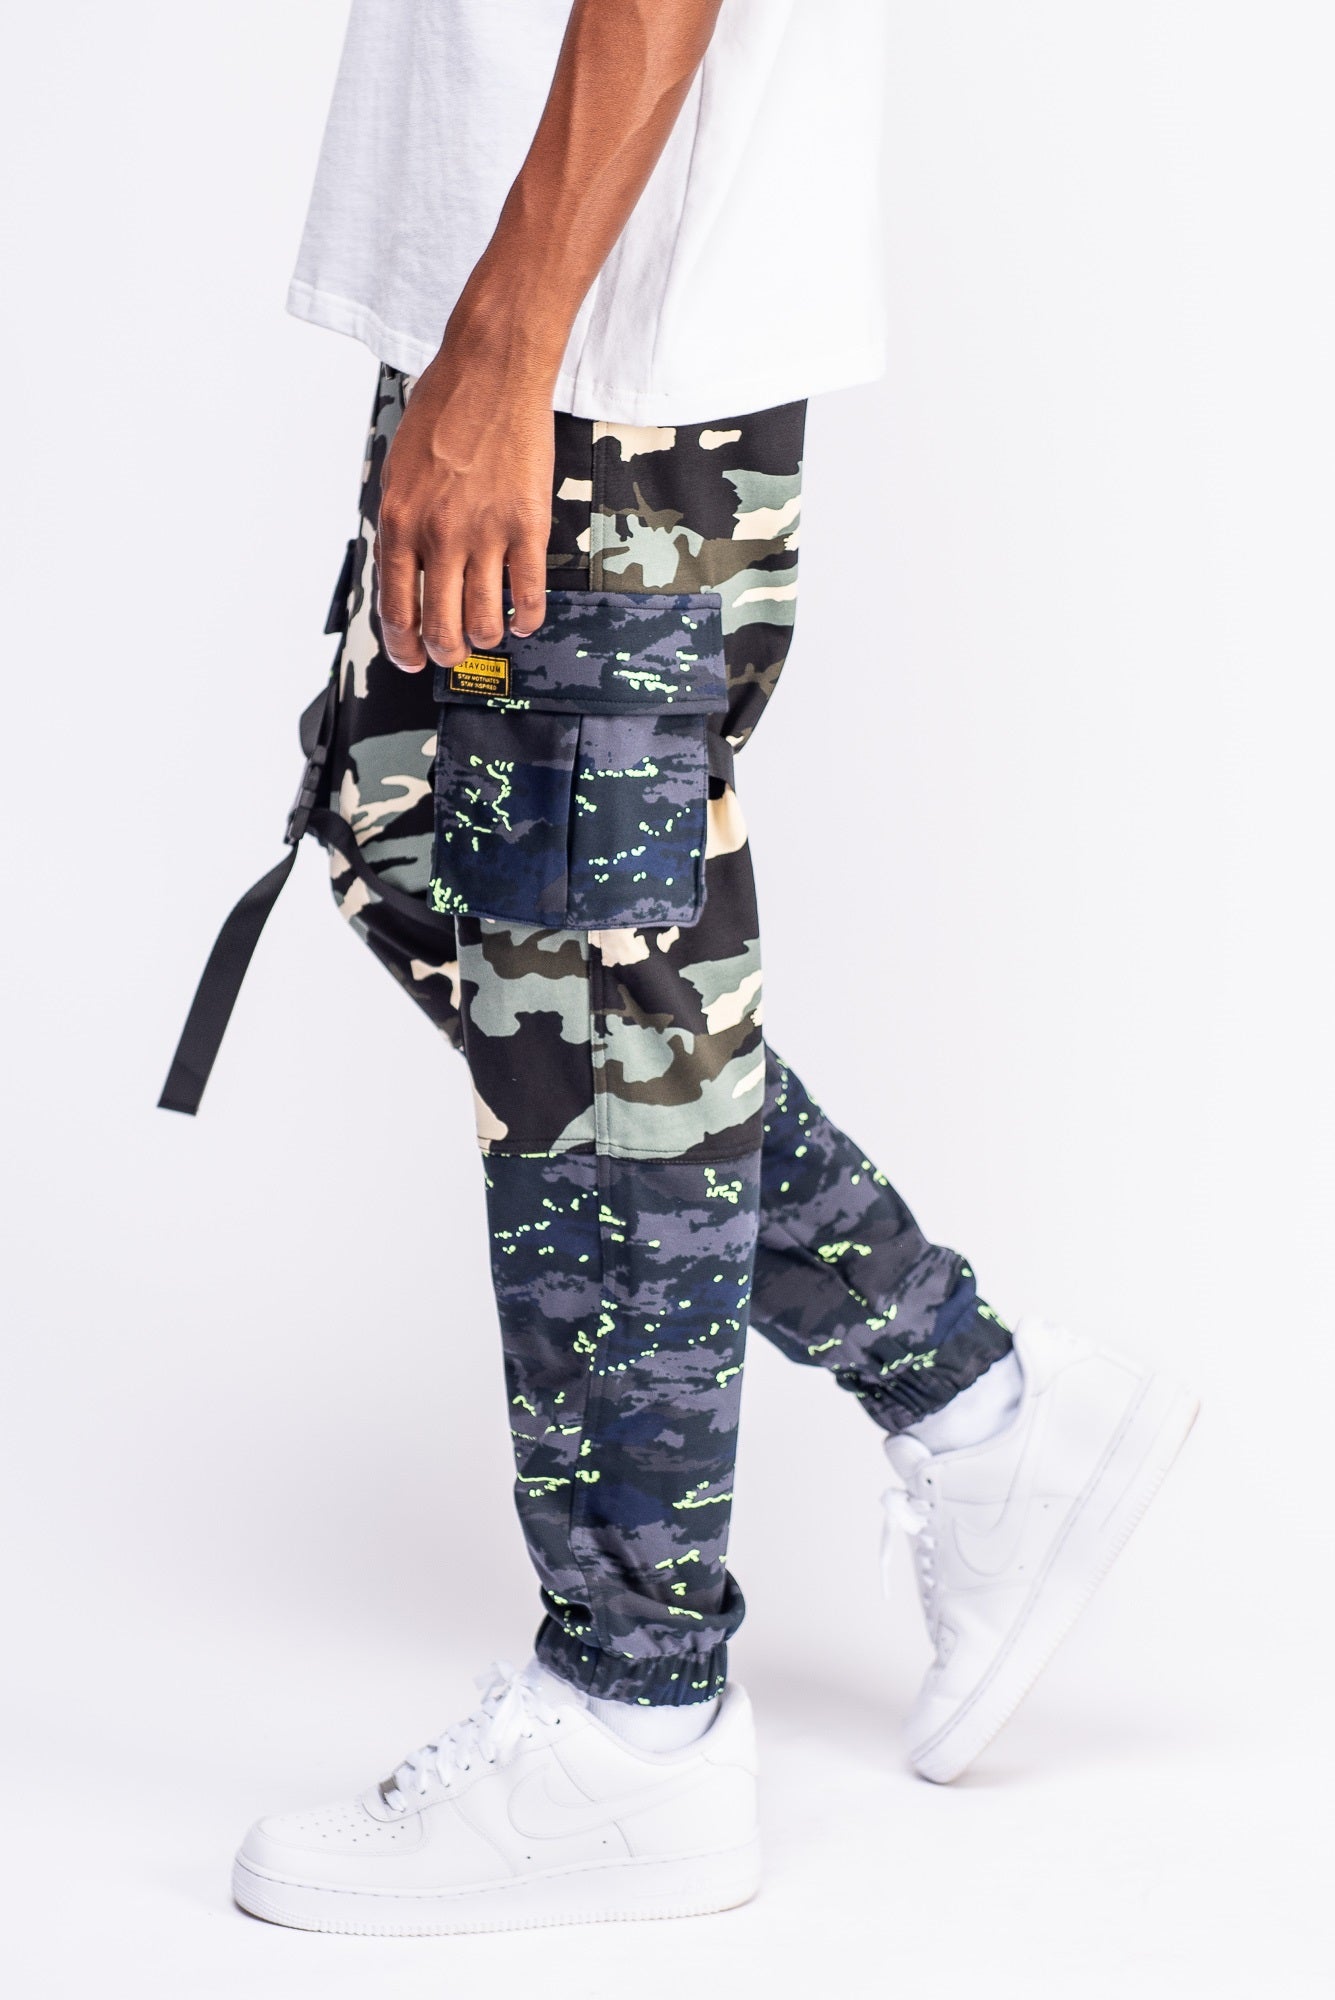 MM CARGO POCKET CAMO *** SPECIAL SUBSCRIBER PRICE LIMITED TIME *** – MINAA  MONROE